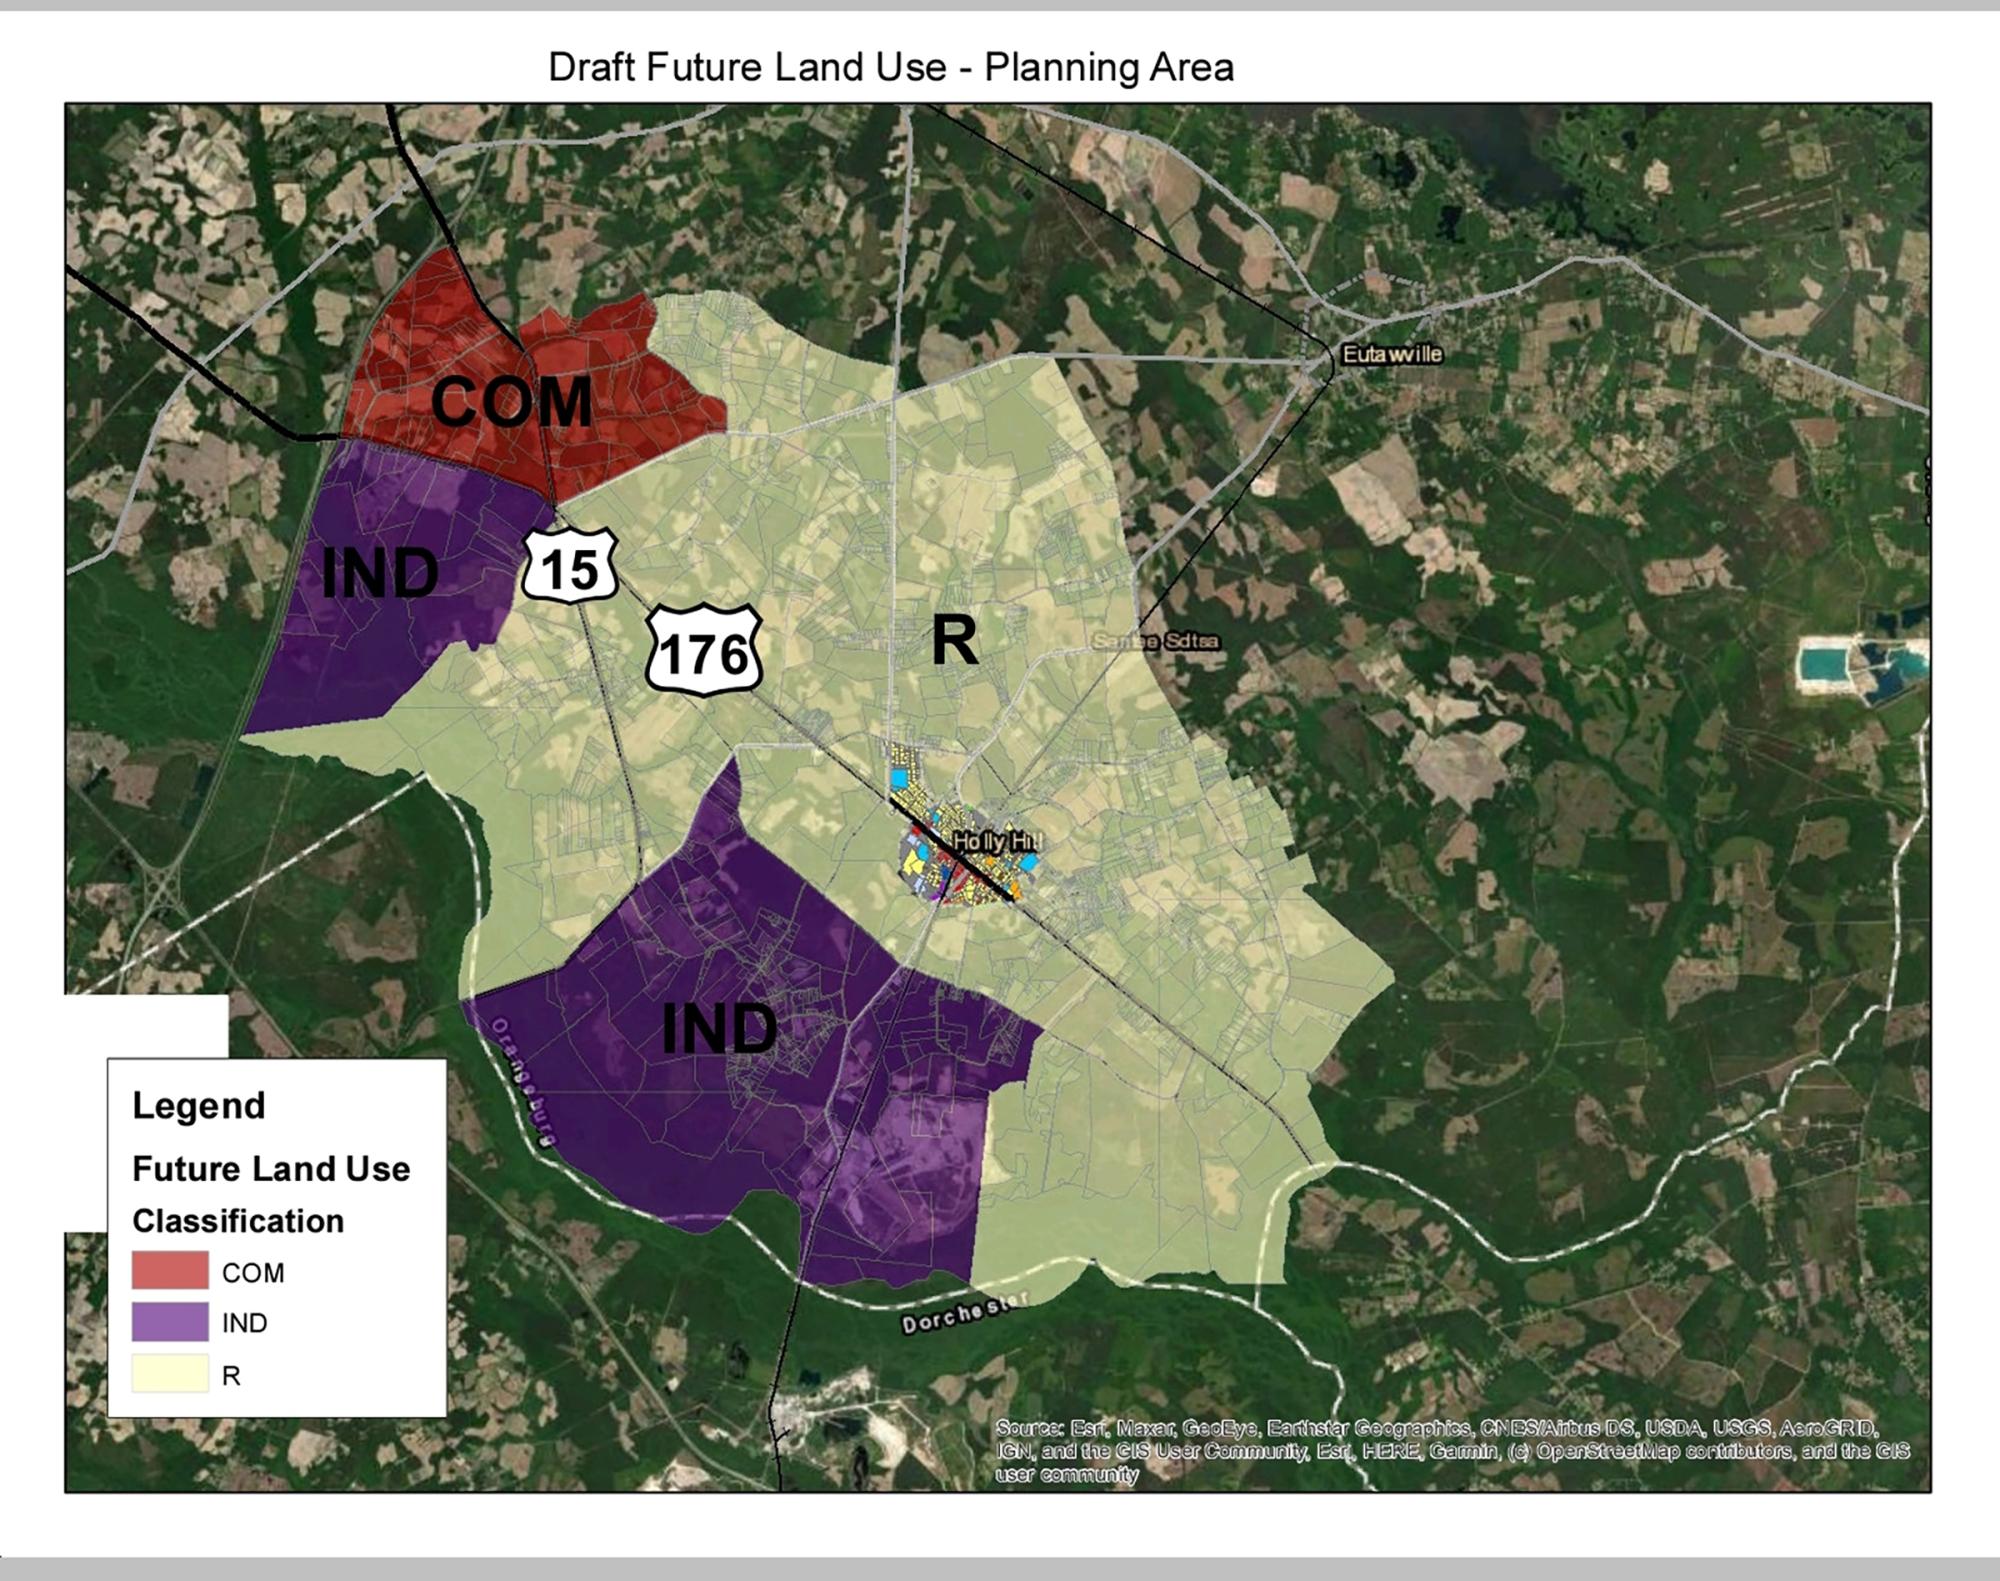 Holly Hill annexation